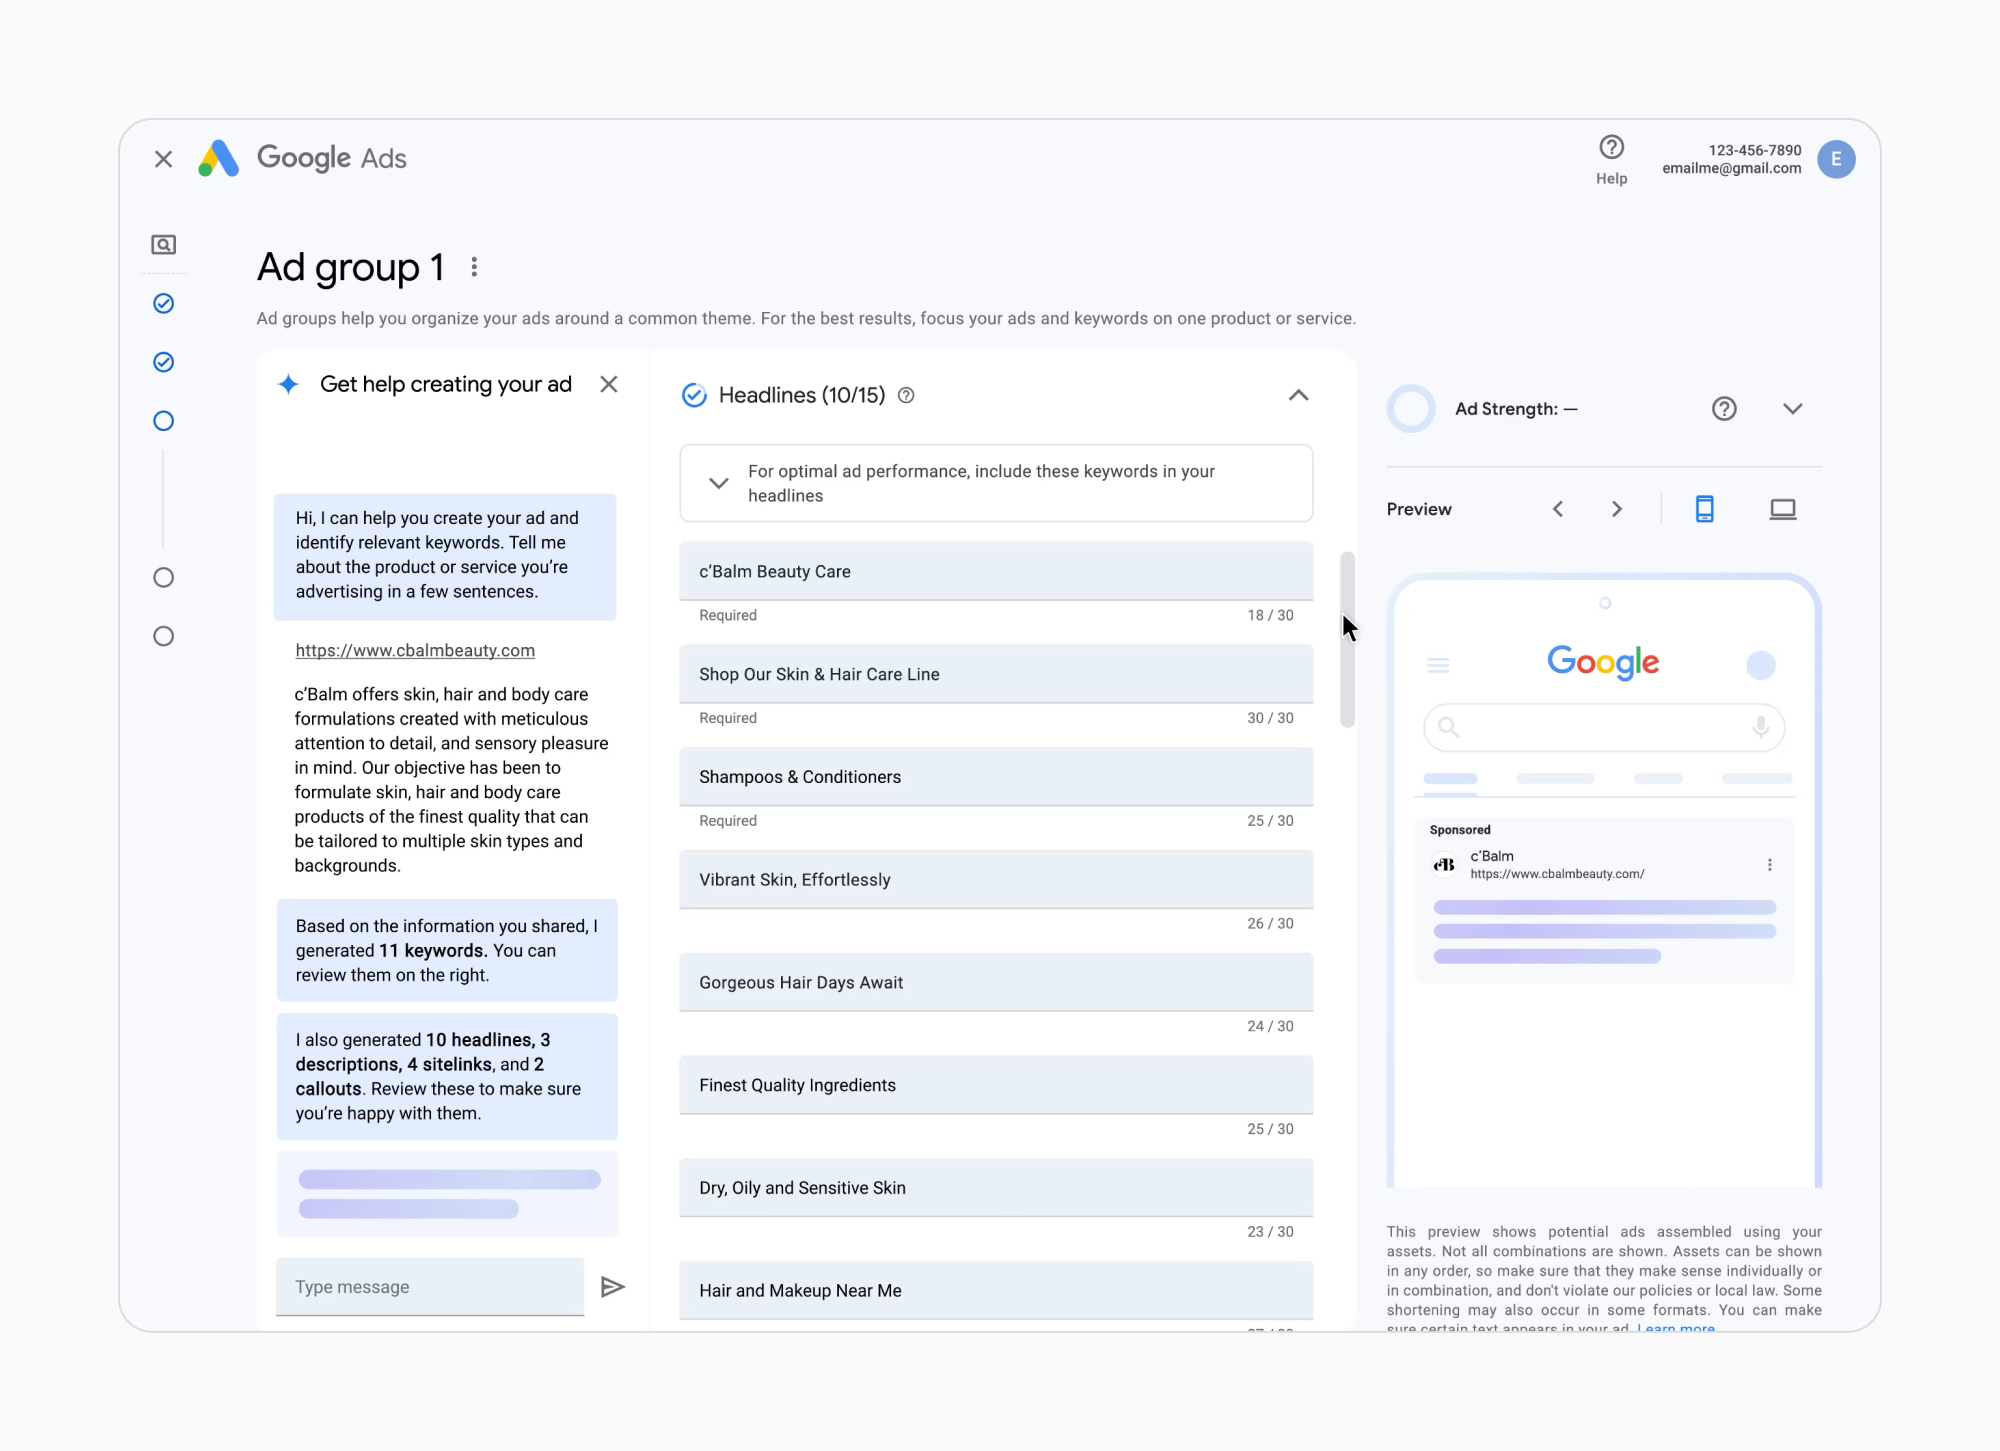 google marketing live 2023 automatically created assets aca google ads 4 646c2ce008d41 sej - Google Marketing Live 2023: What To Expect In AI Advancements